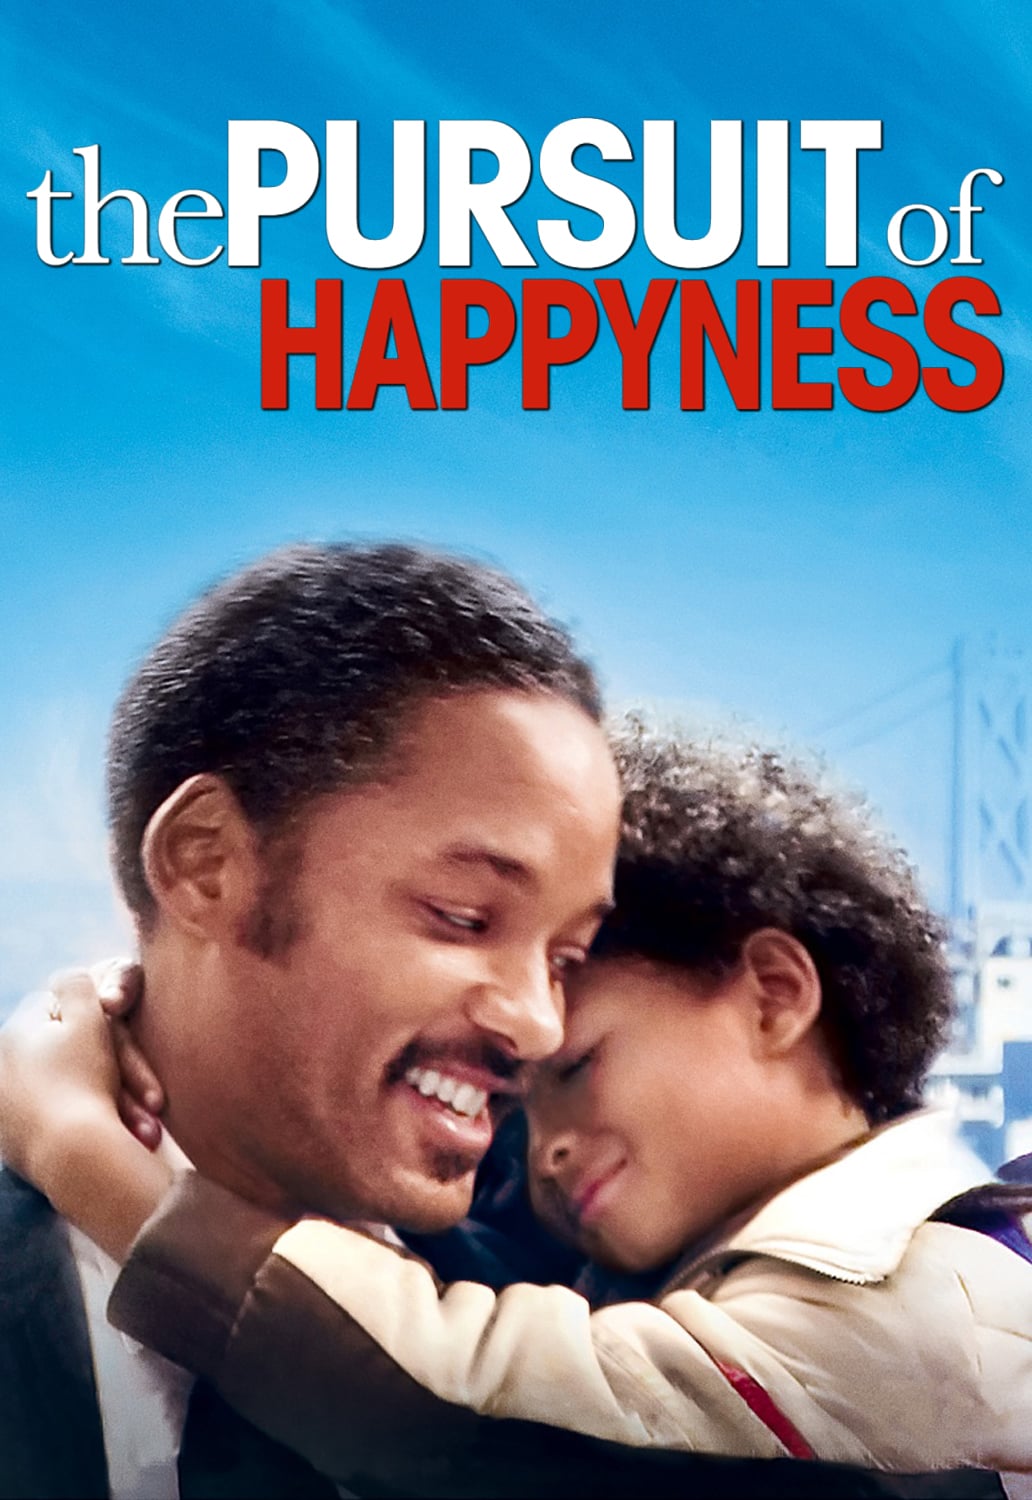 Download pursuit of happiness full movie